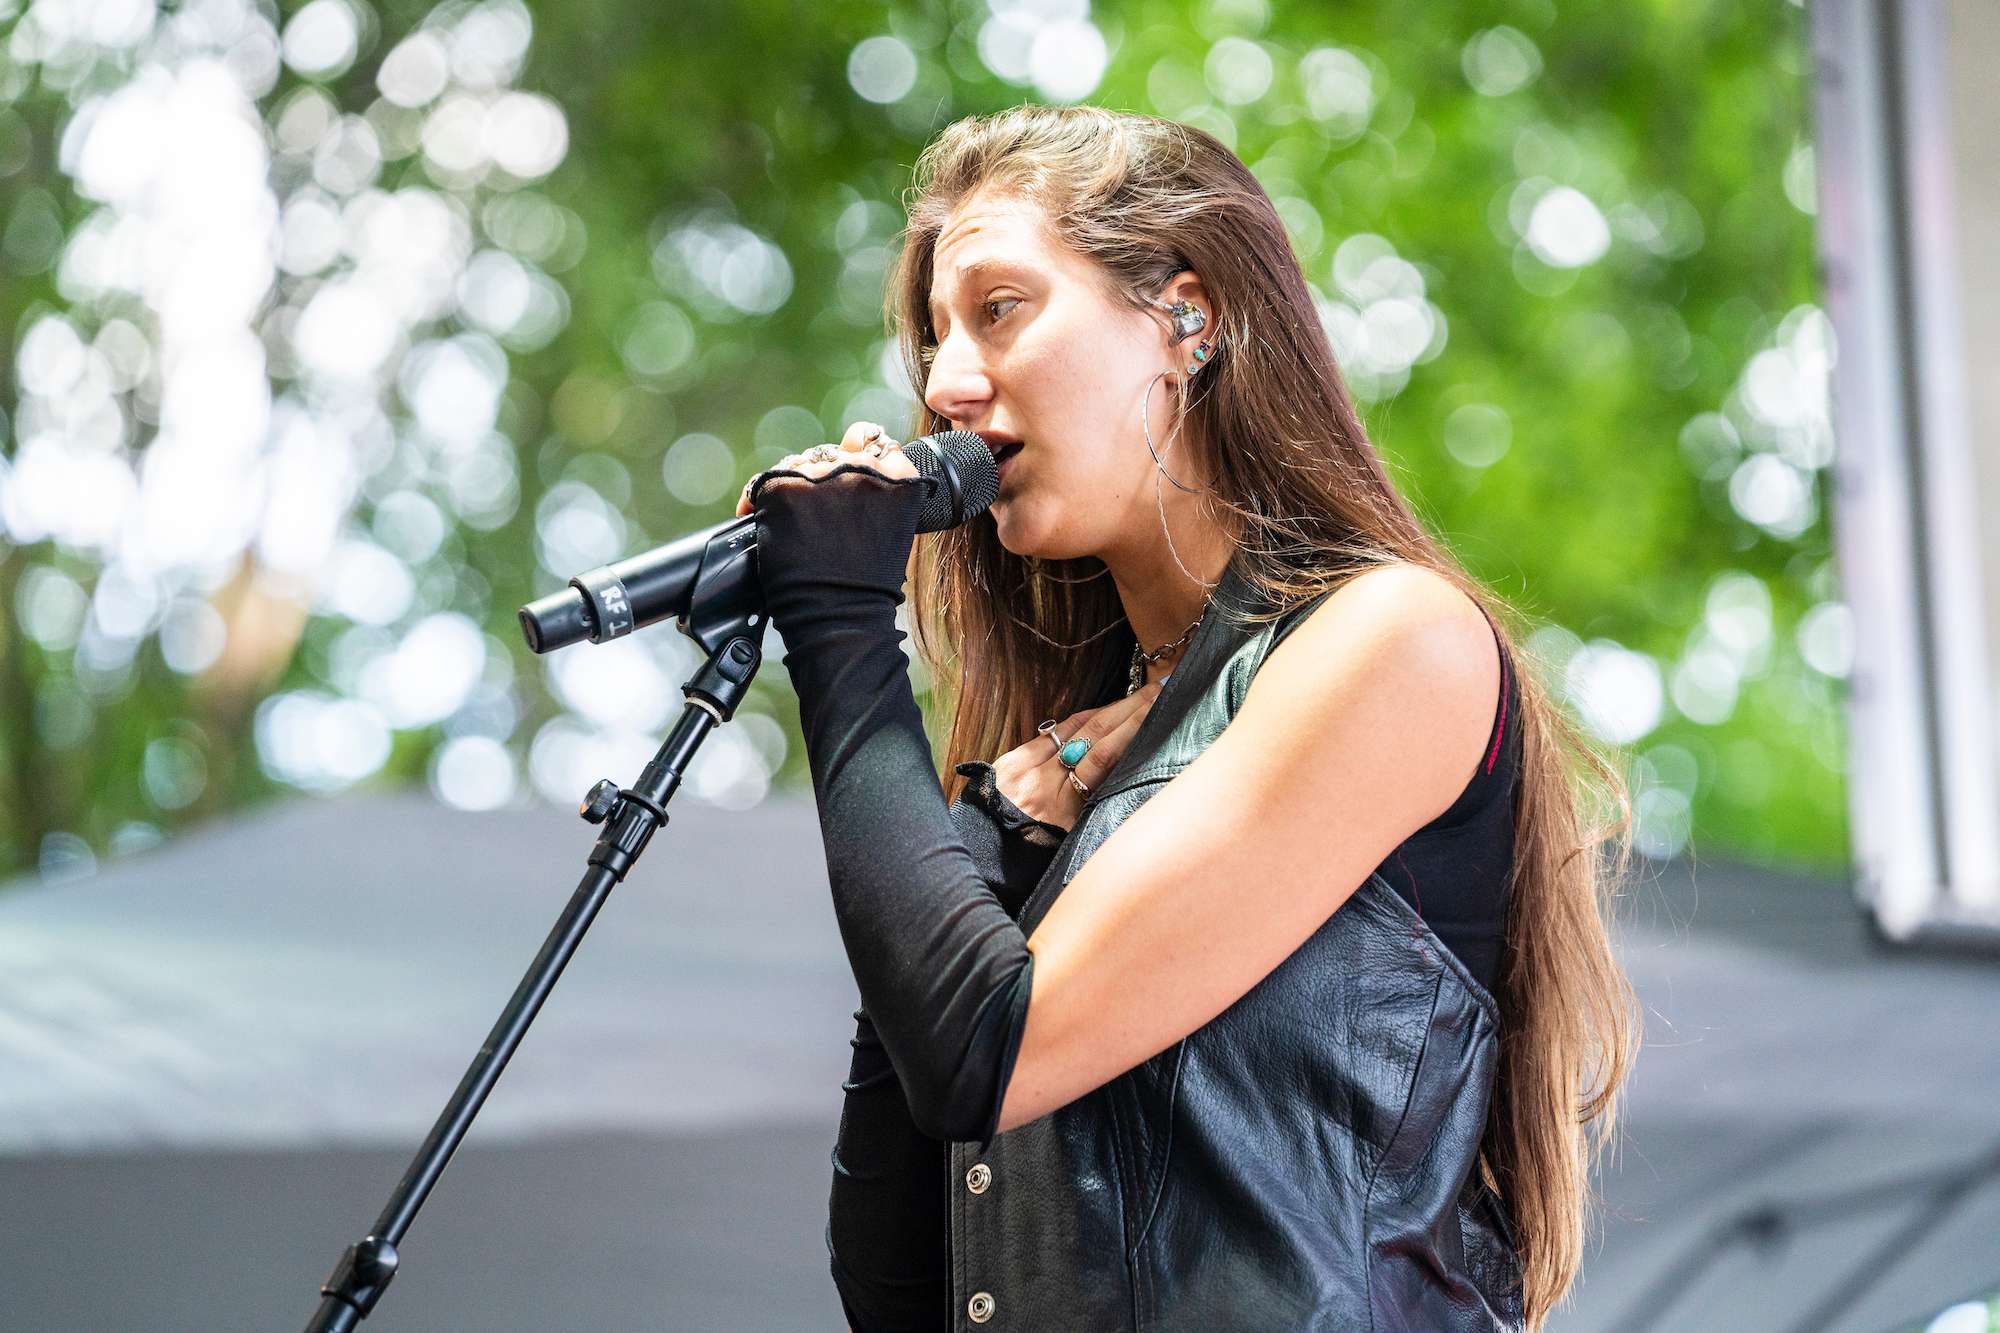 Rosie Live at Lollapalooza [GALLERY] 12